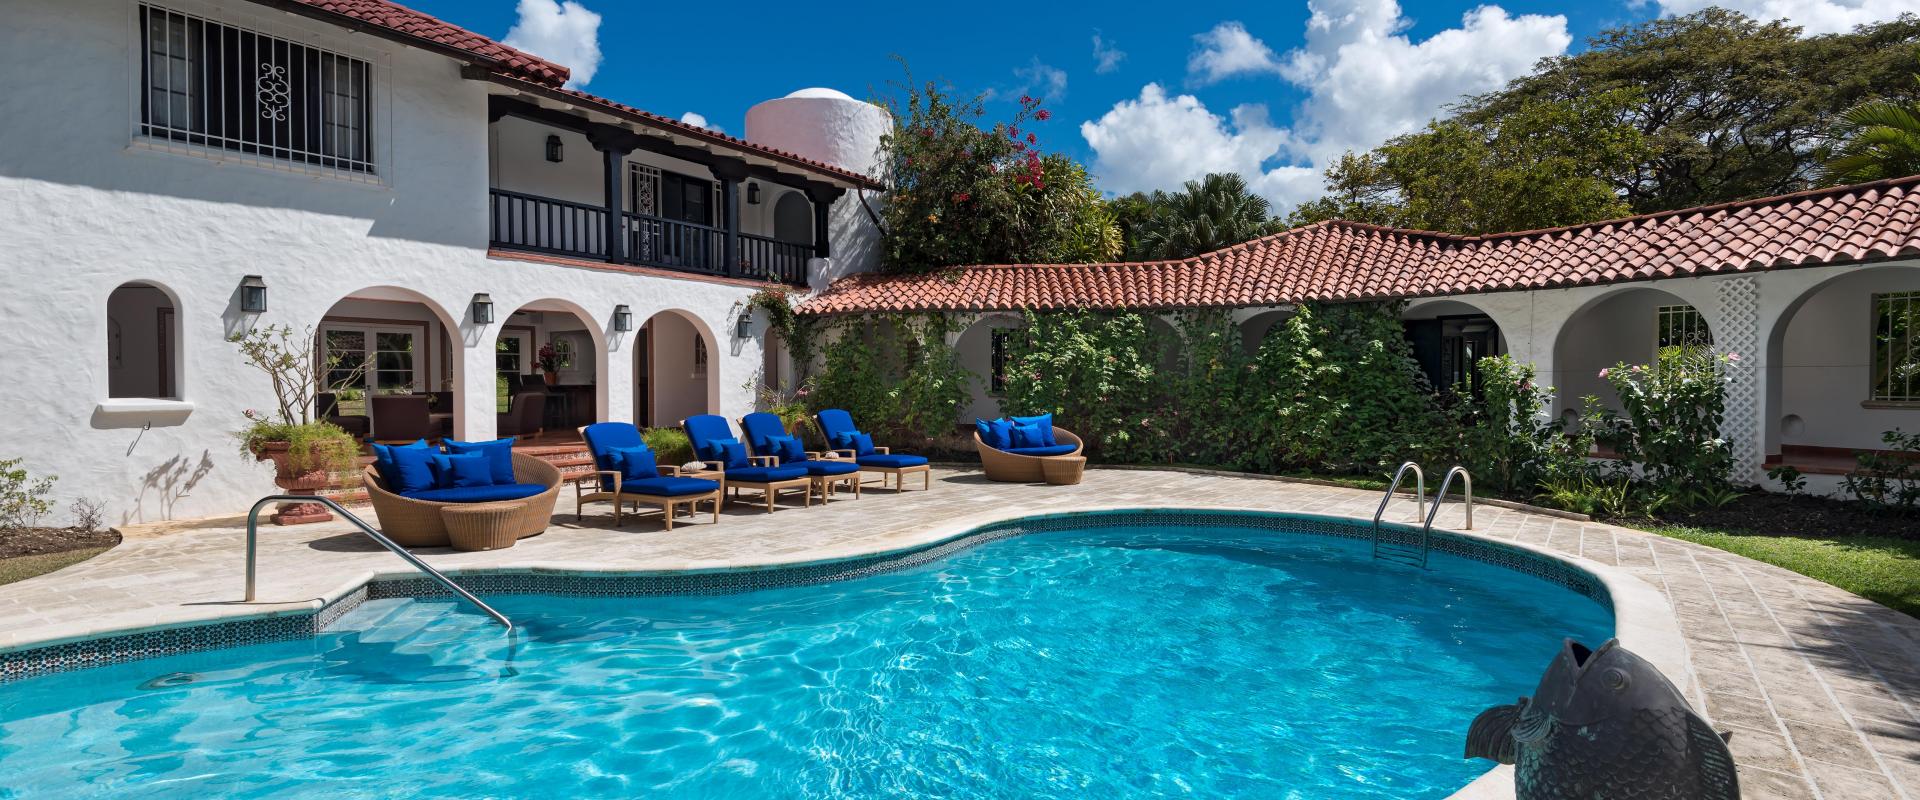 Swimming Pool Towards Cottage Elsewhere 10 Bedroom Sandy Lane Villa For Rent In Barbados 